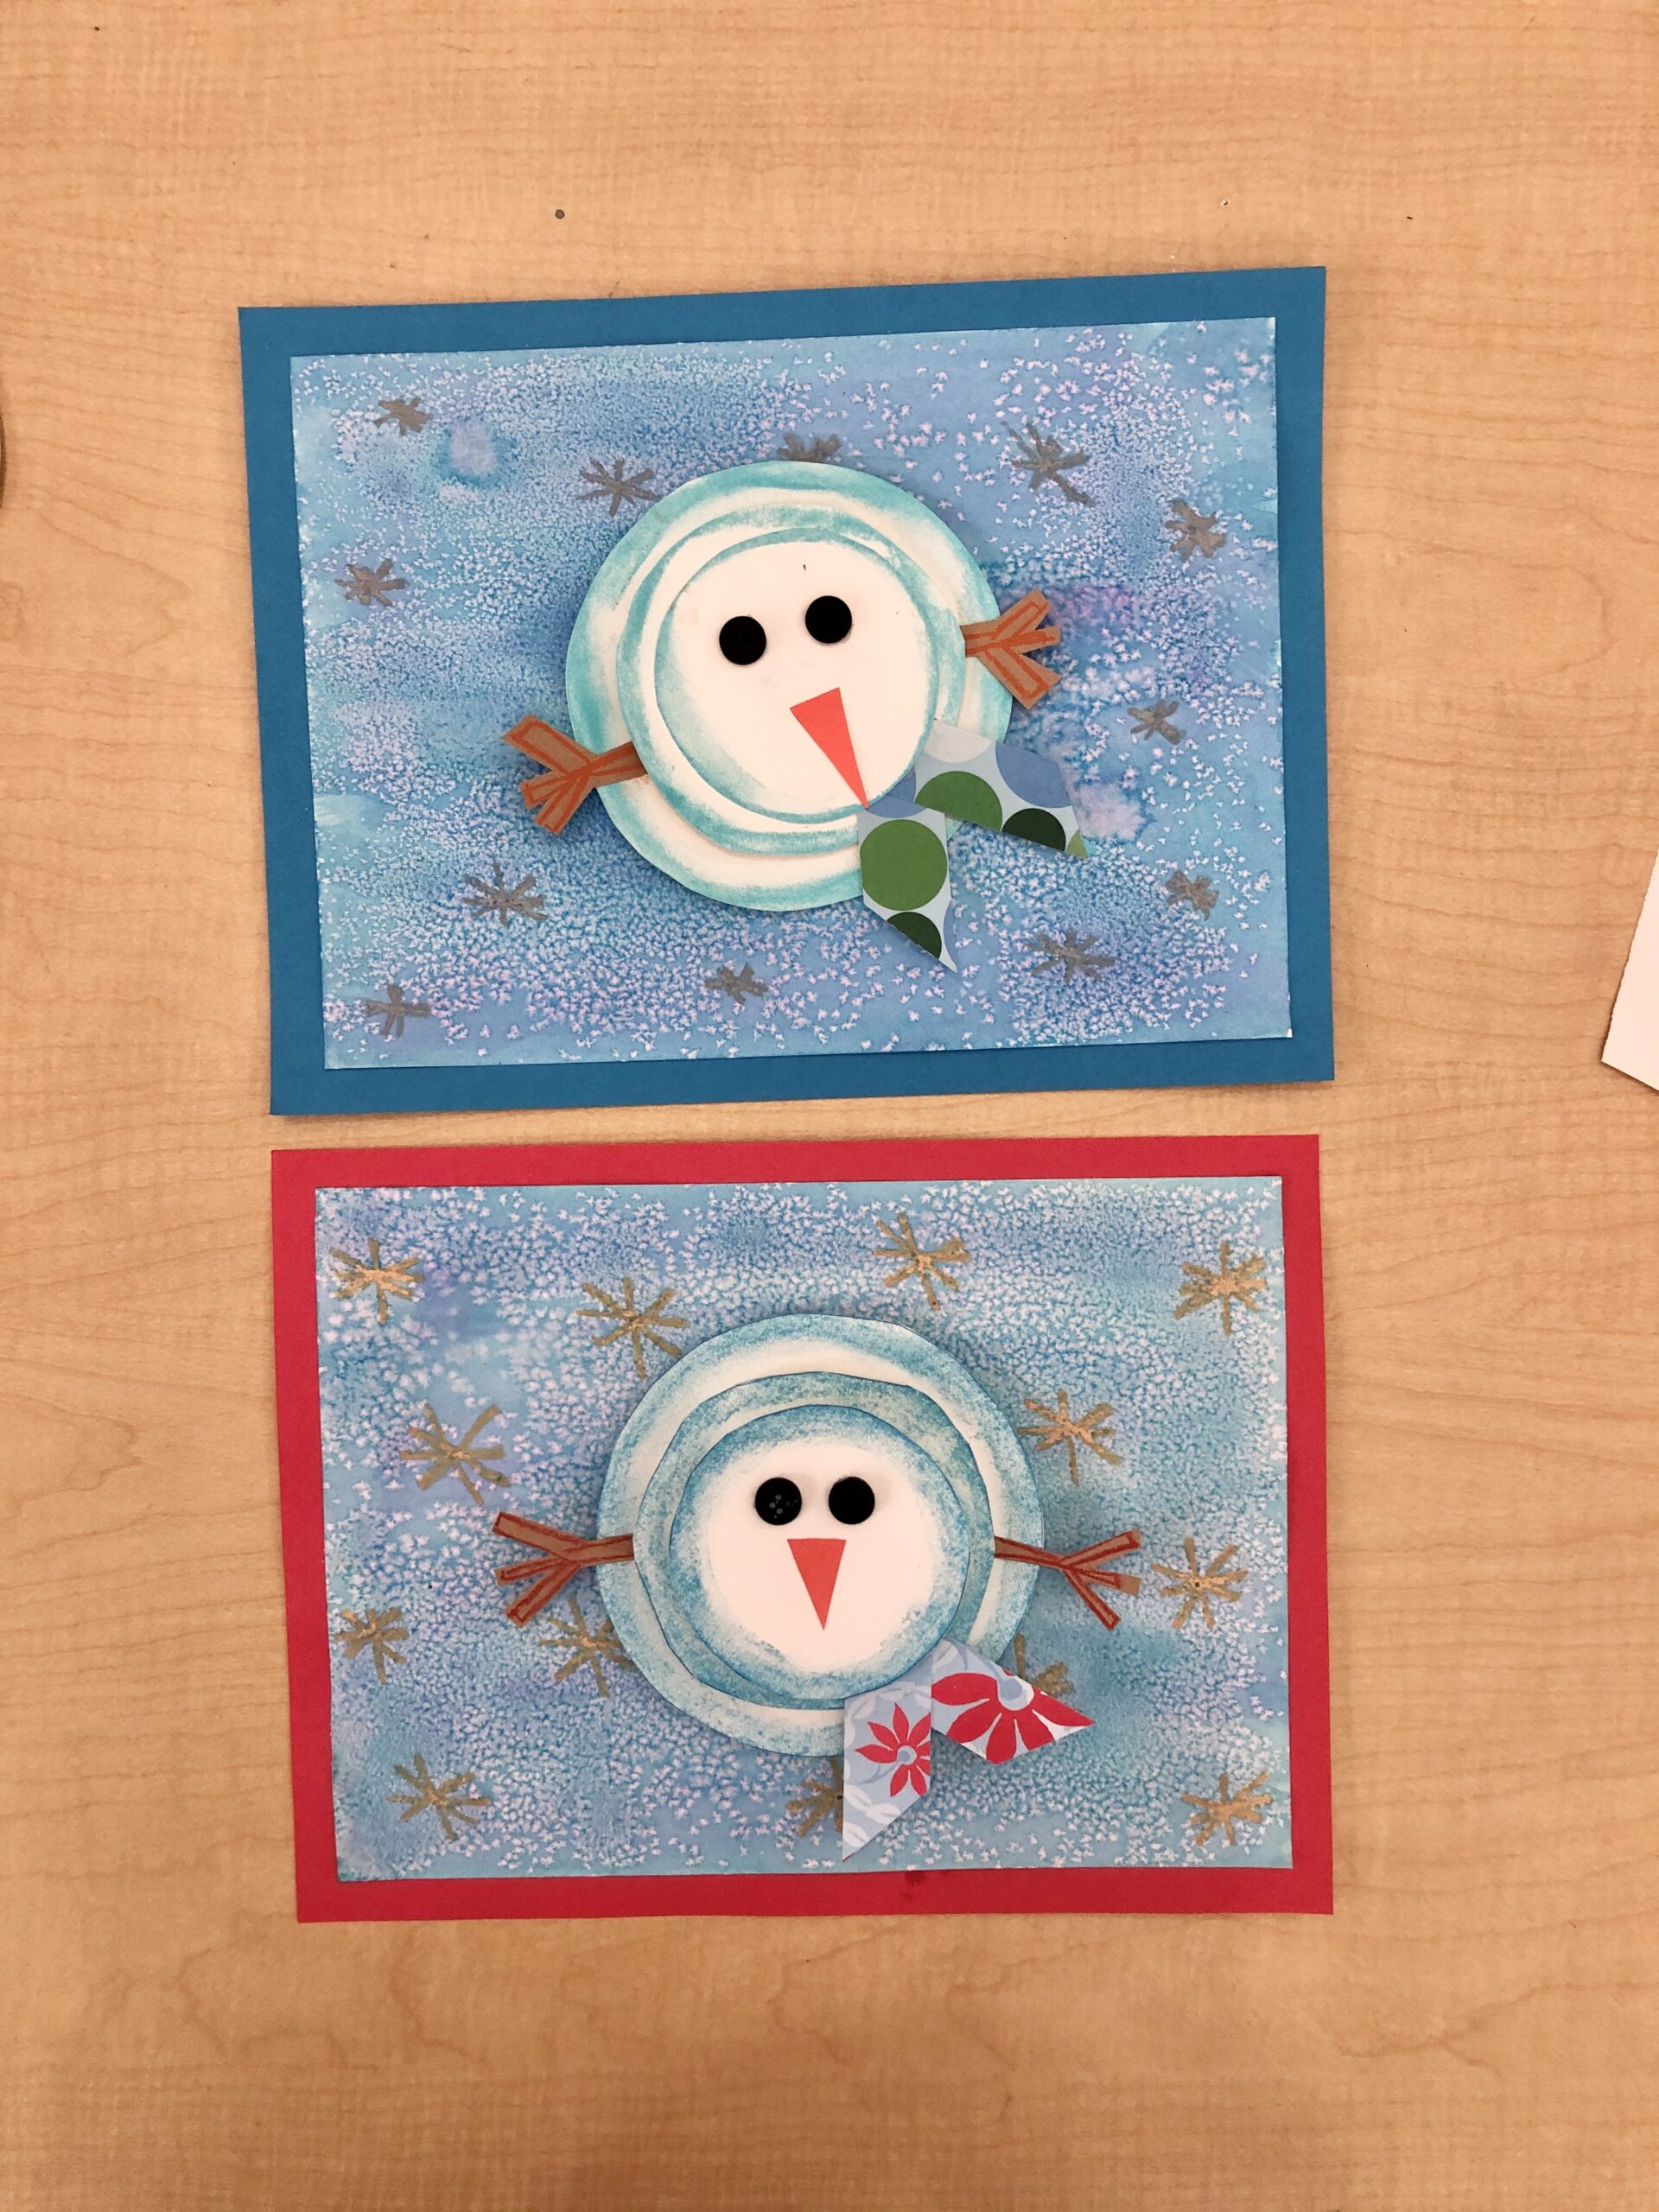 Learning about Perspective Art while create a fun Winter Scene and an Adorable snowman.